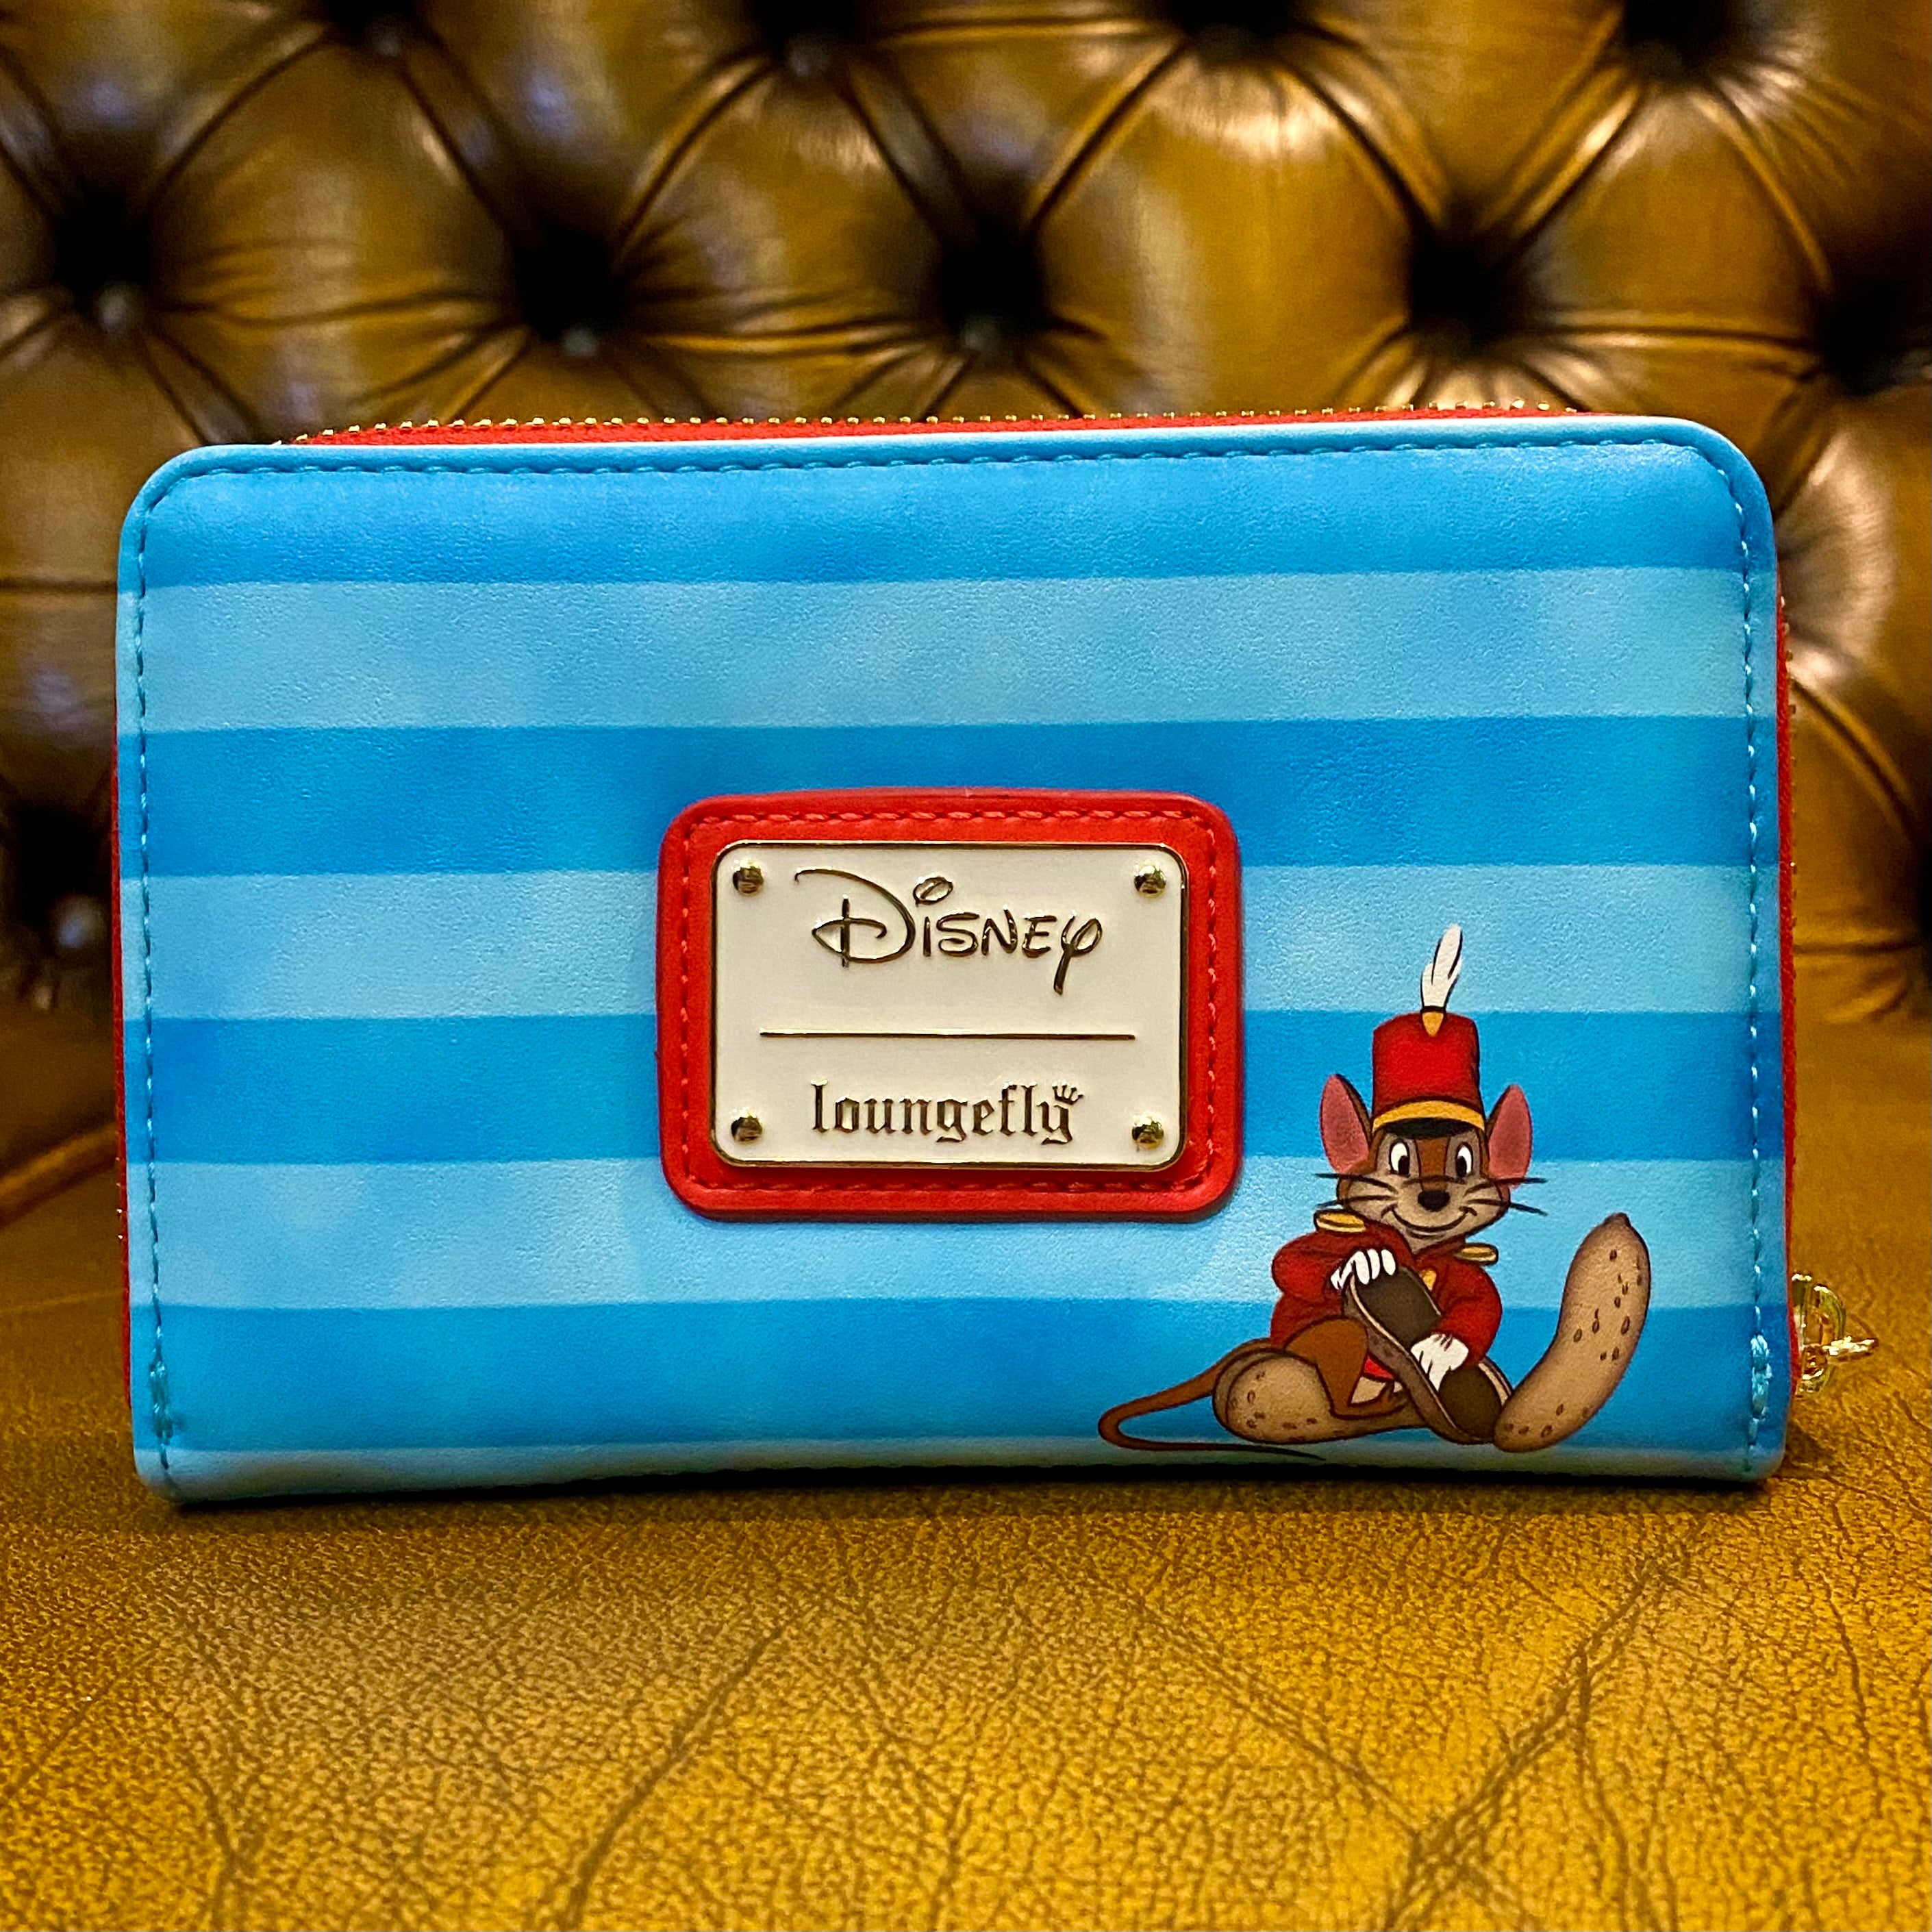 Dumbo Book Series Zip Around Wallet - Loungefly [Last Available]